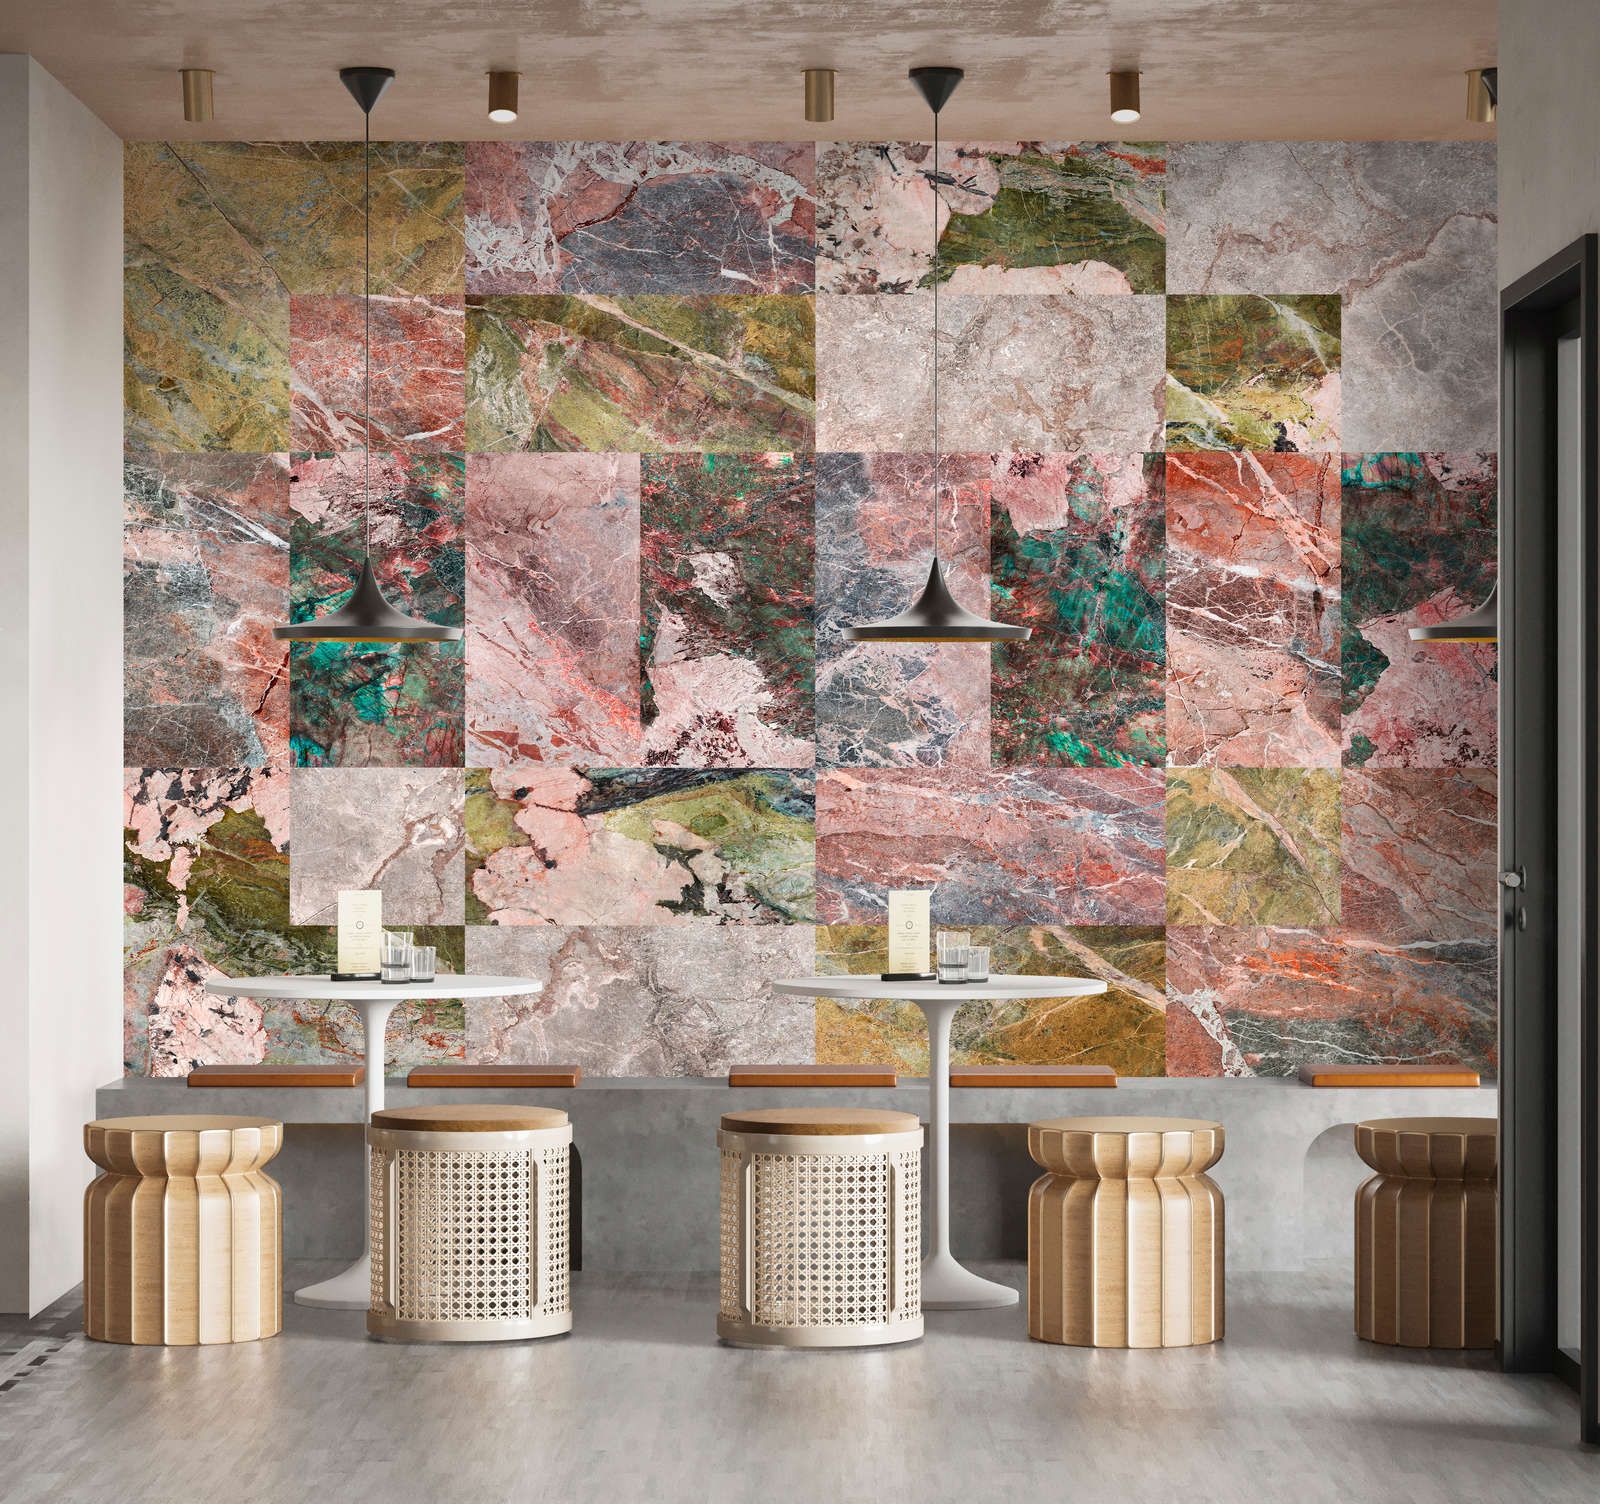             Photo wallpaper »mixed marble« - Marble Patchwork Design - Colourful | Matt, Smooth non-woven
        